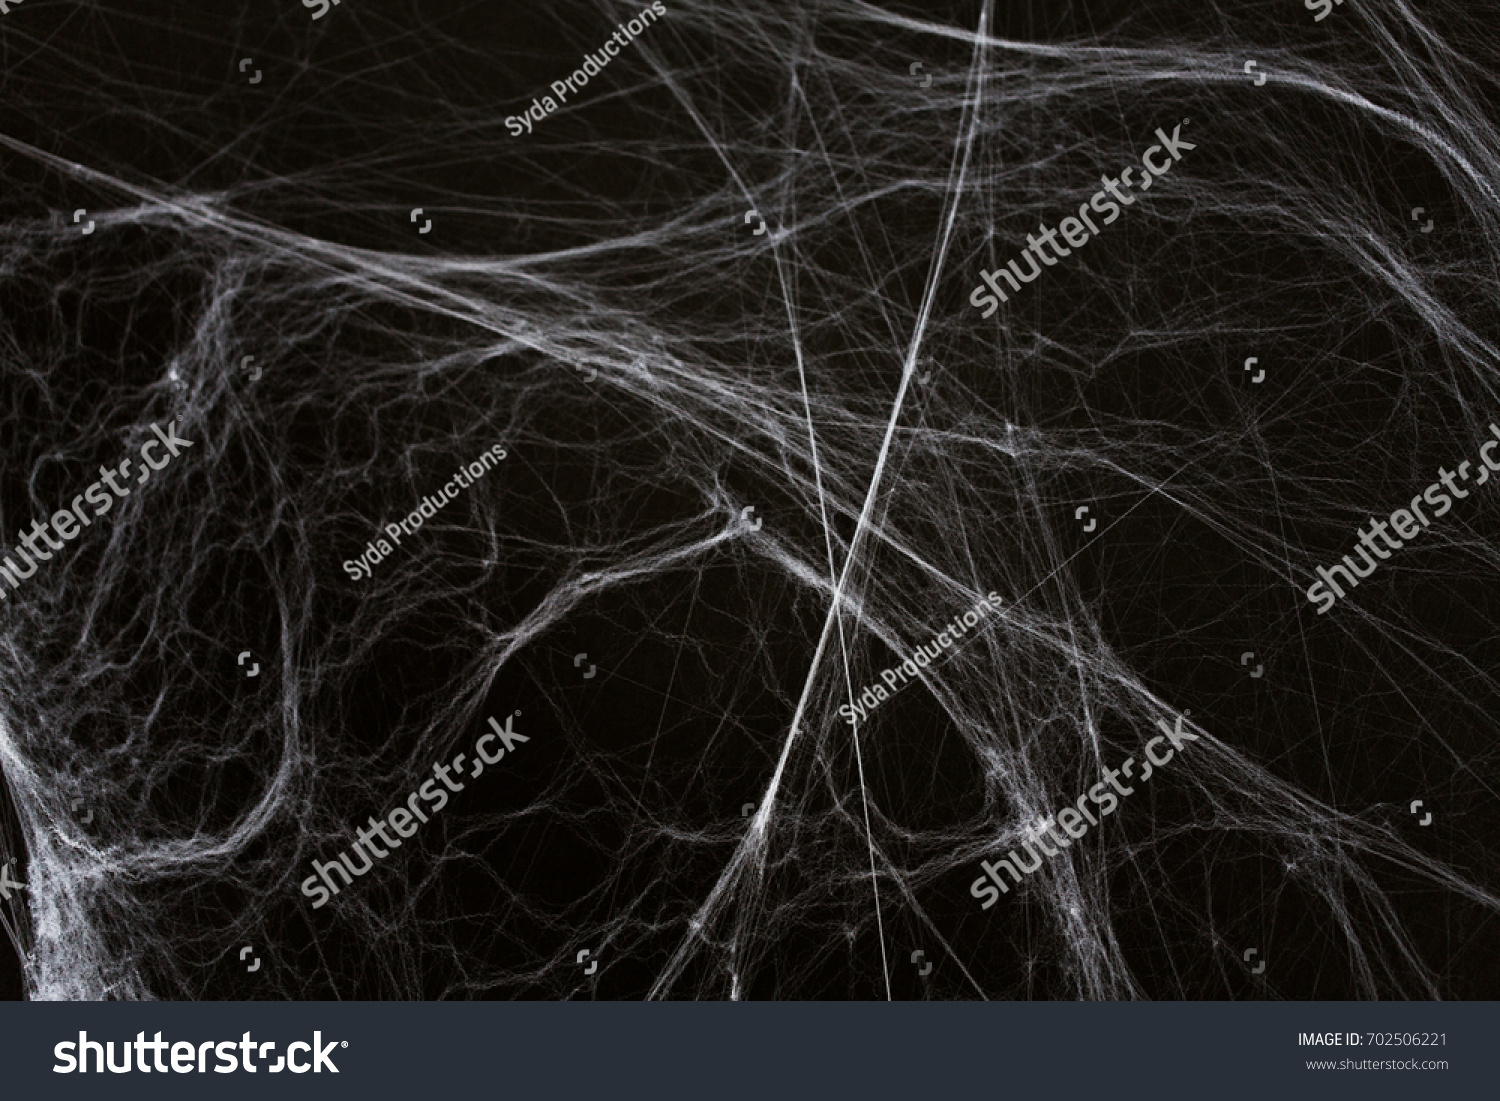 halloween, decoration and horror concept - ecoration of artificial spider web over black background #702506221